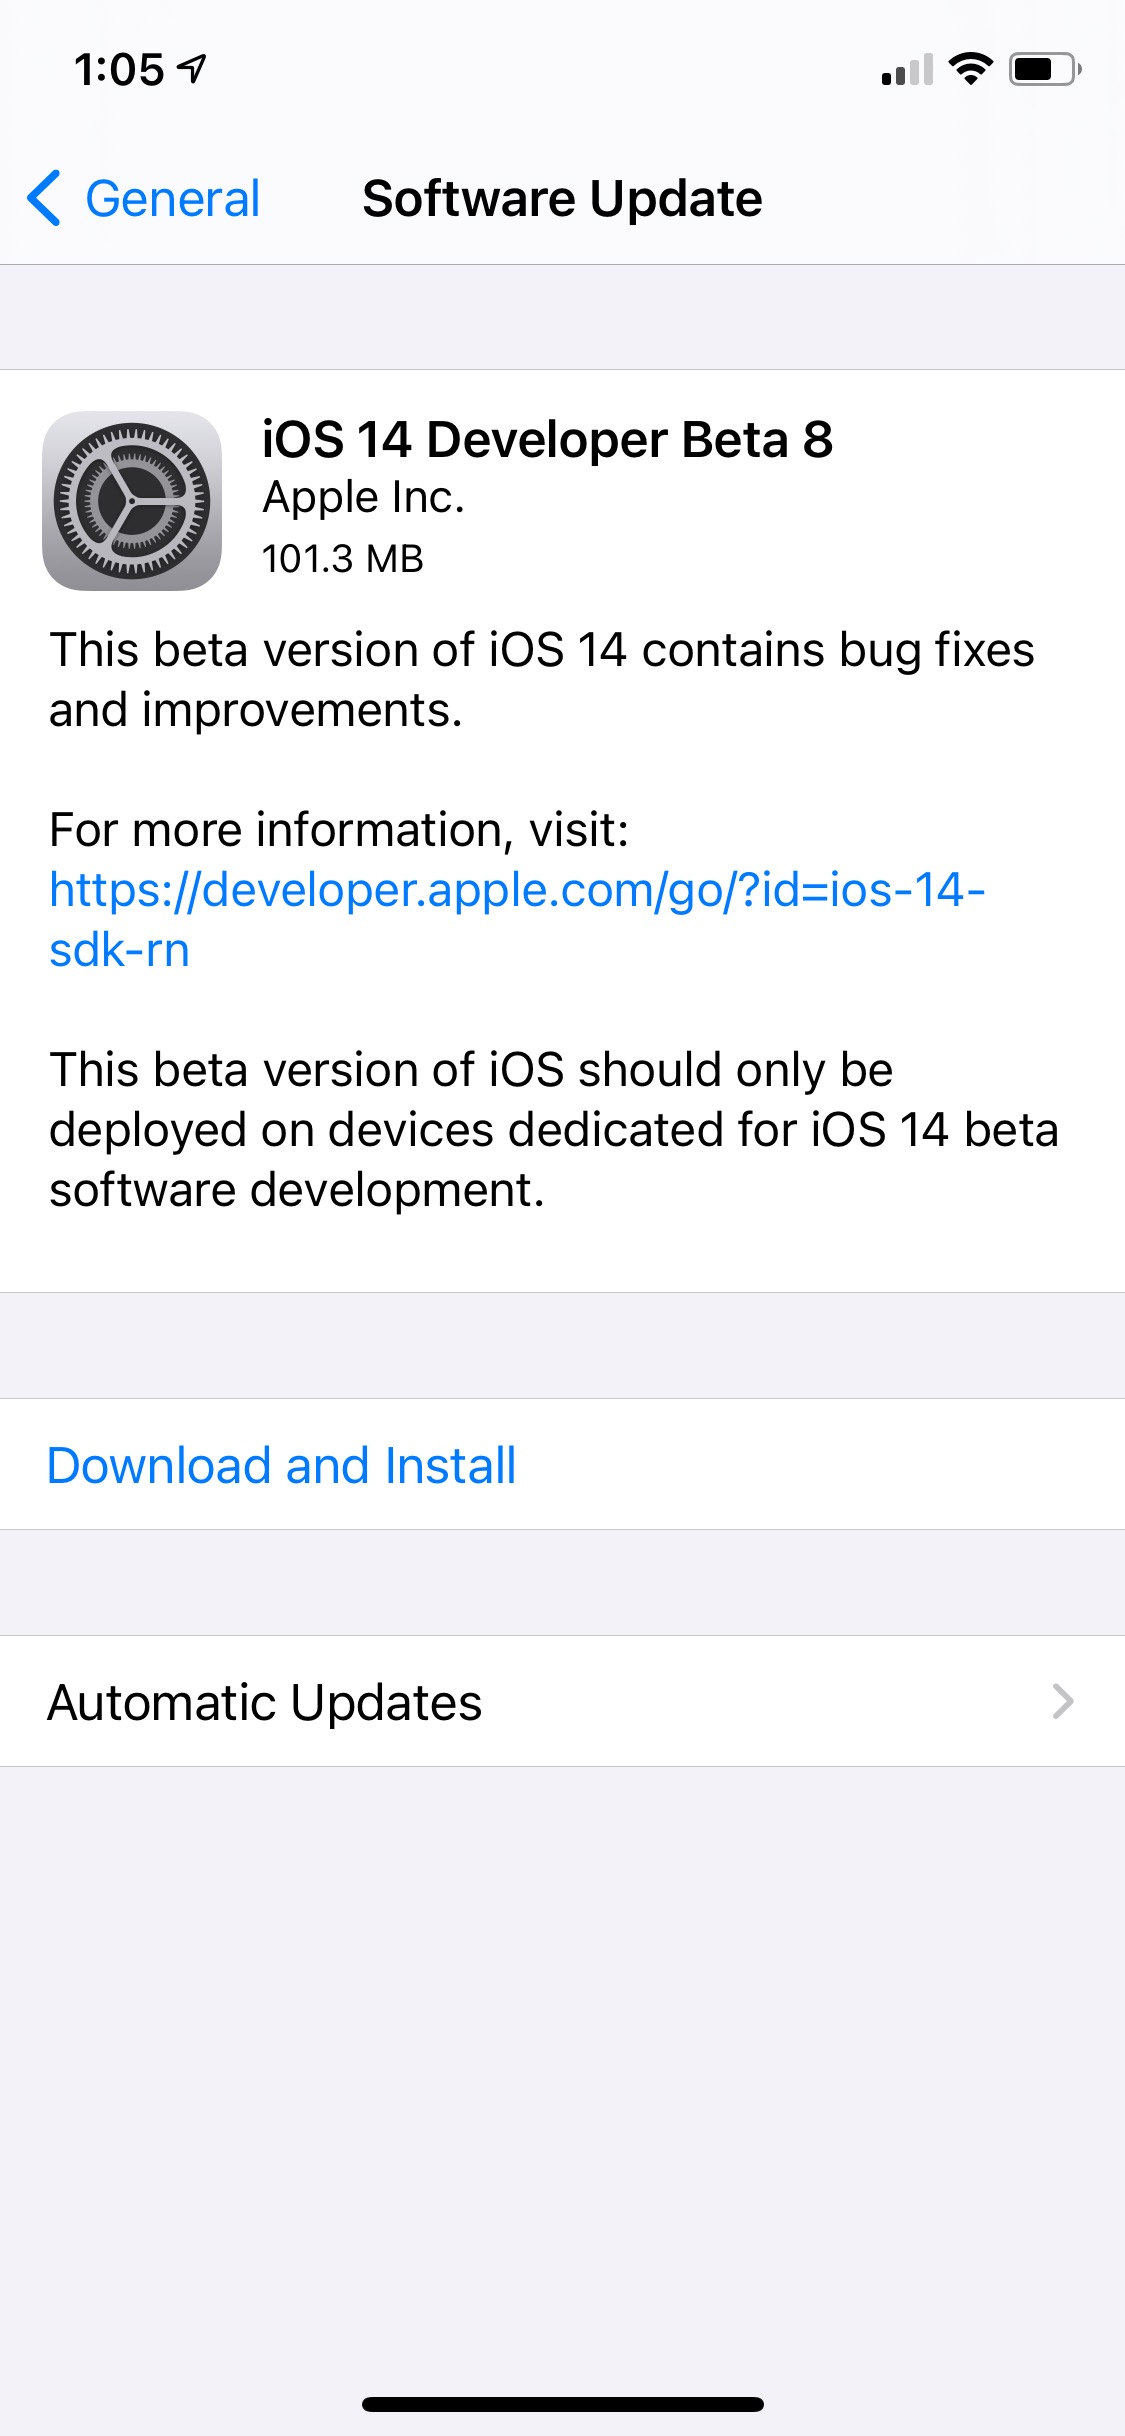 Apple Releases iOS 14 Beta 8 and iPadOS 14 Beta 8 [Download]